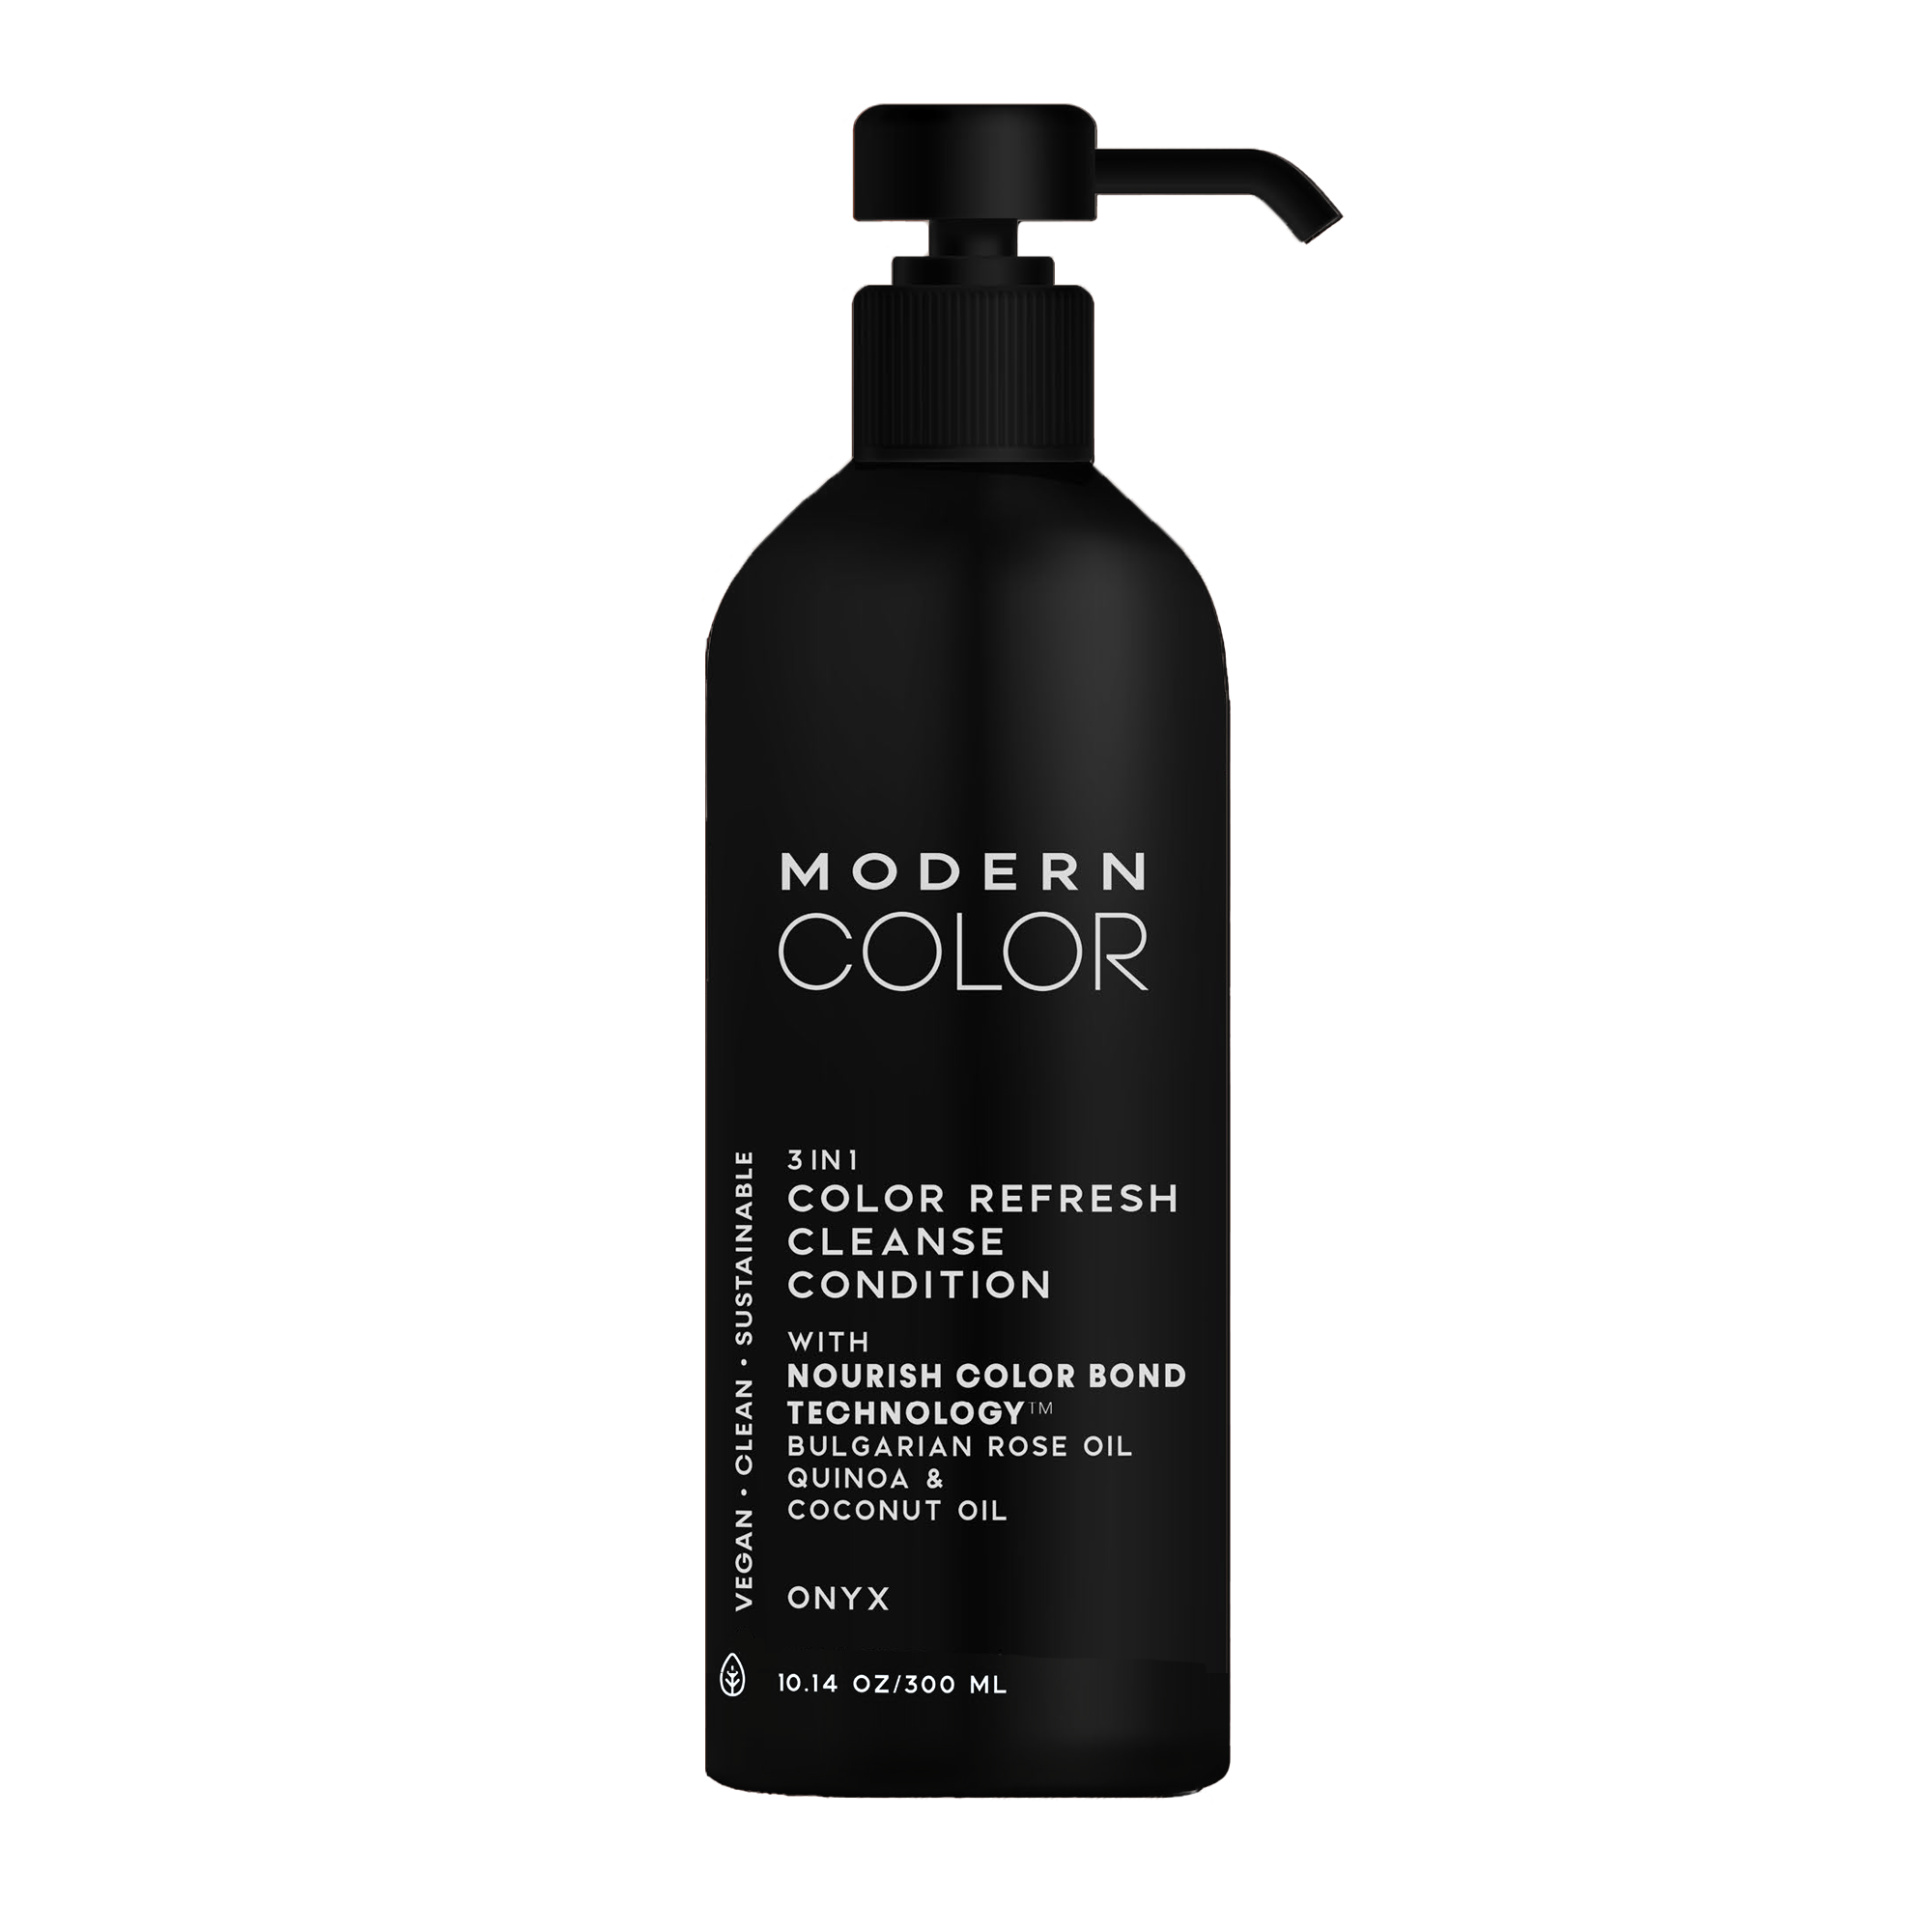 Modern Color 3-in-1 Color Refresh Cleanse Condition - Onyx / ONYX